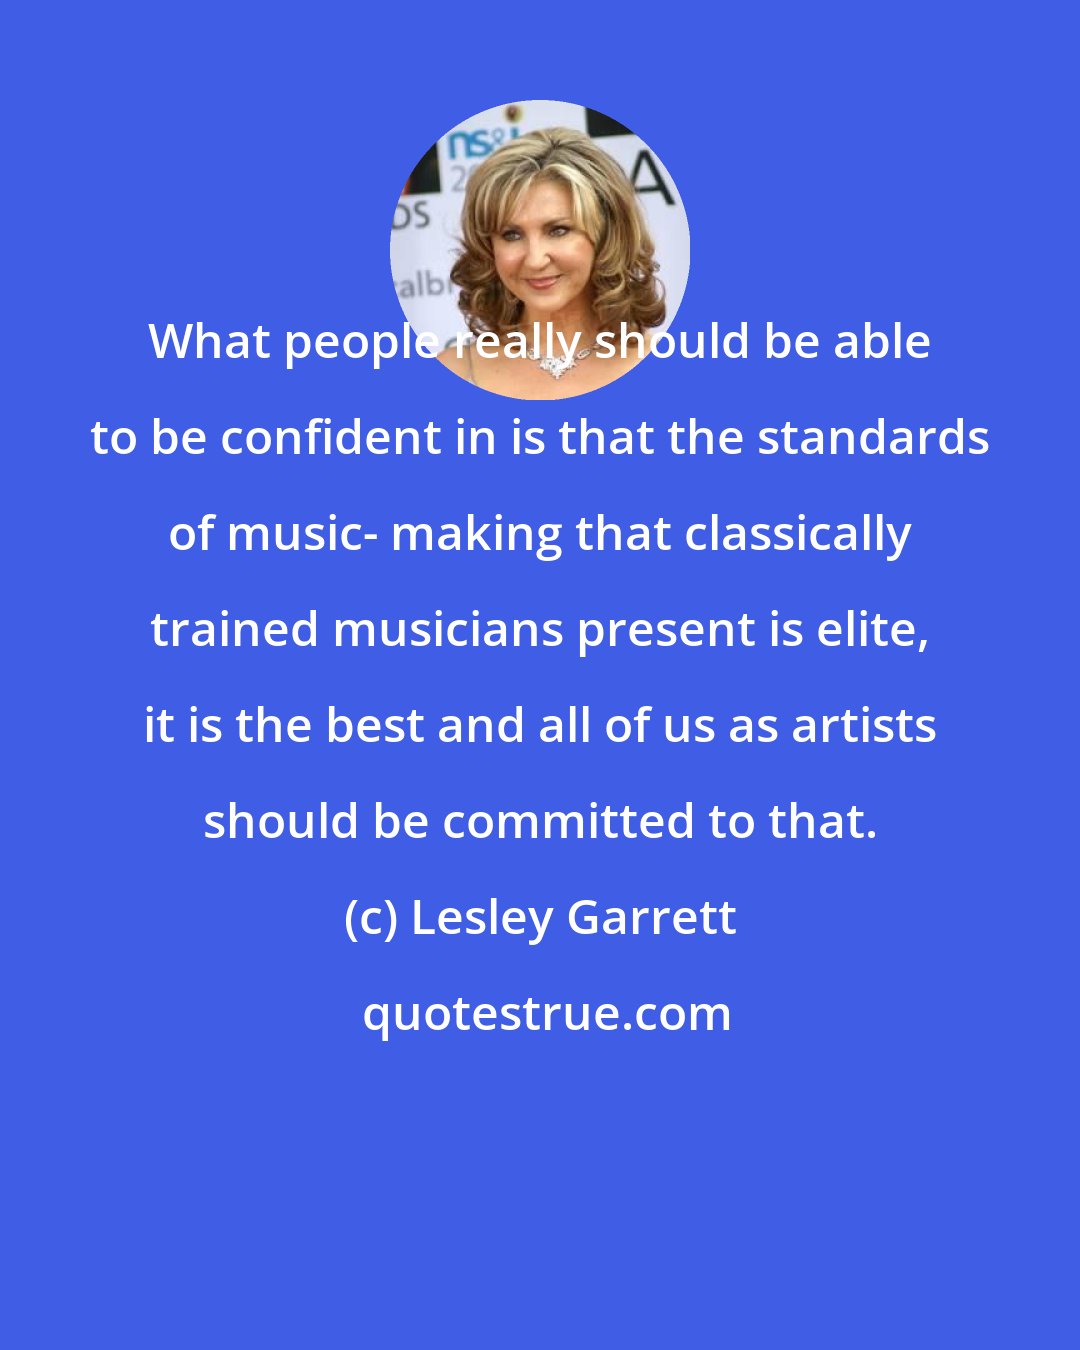 Lesley Garrett: What people really should be able to be confident in is that the standards of music- making that classically trained musicians present is elite, it is the best and all of us as artists should be committed to that.